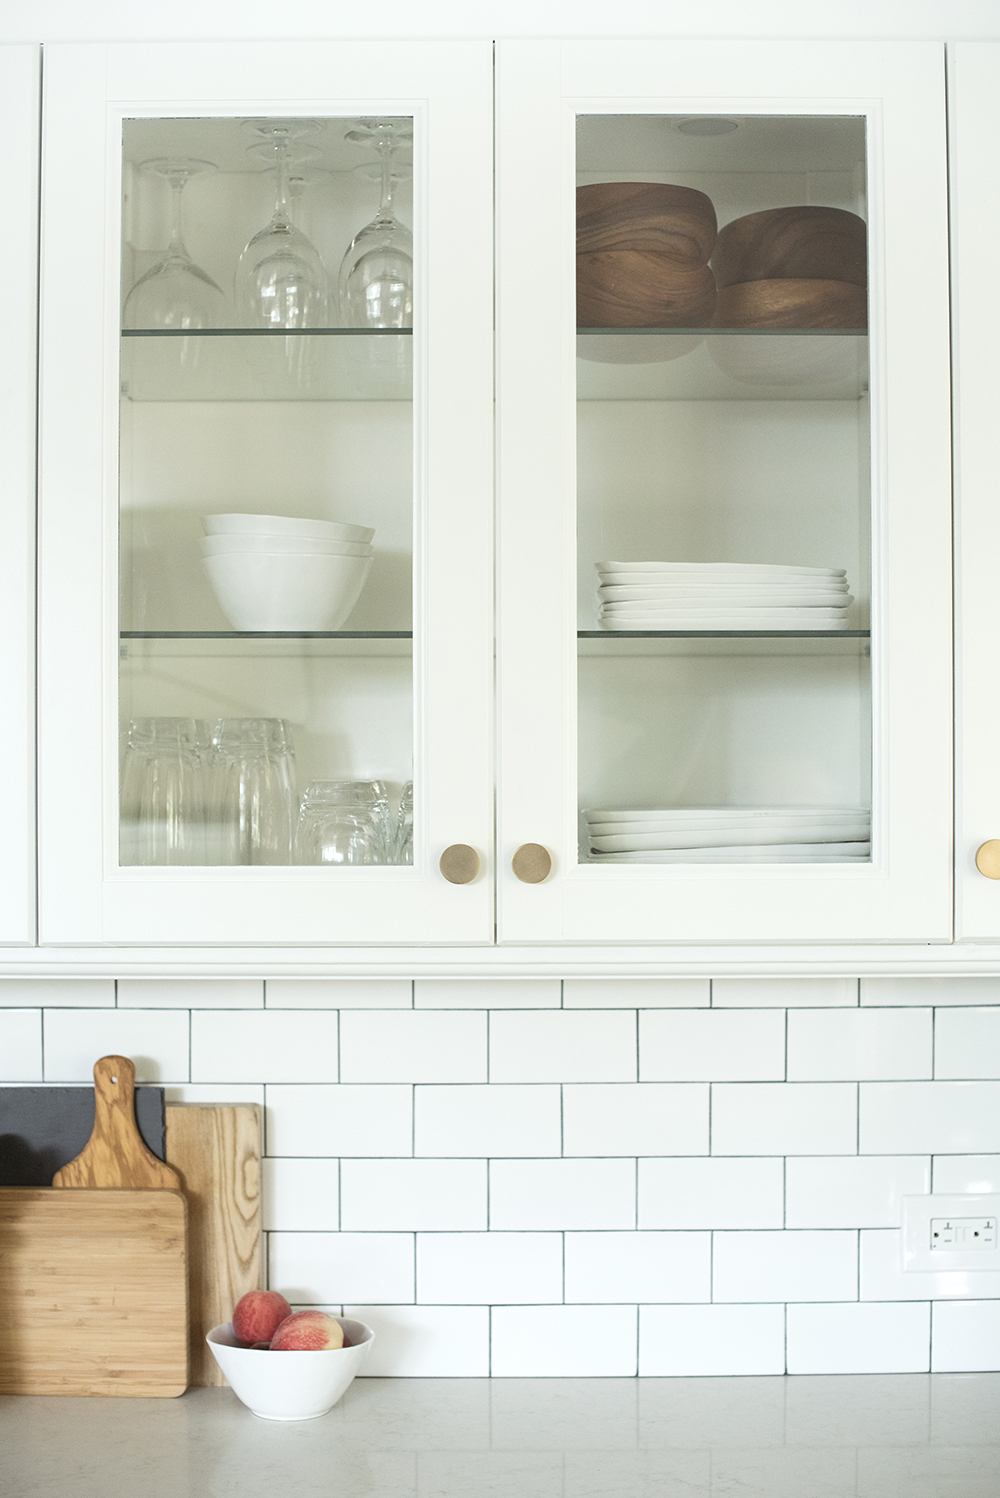 Classic White Cabinetry